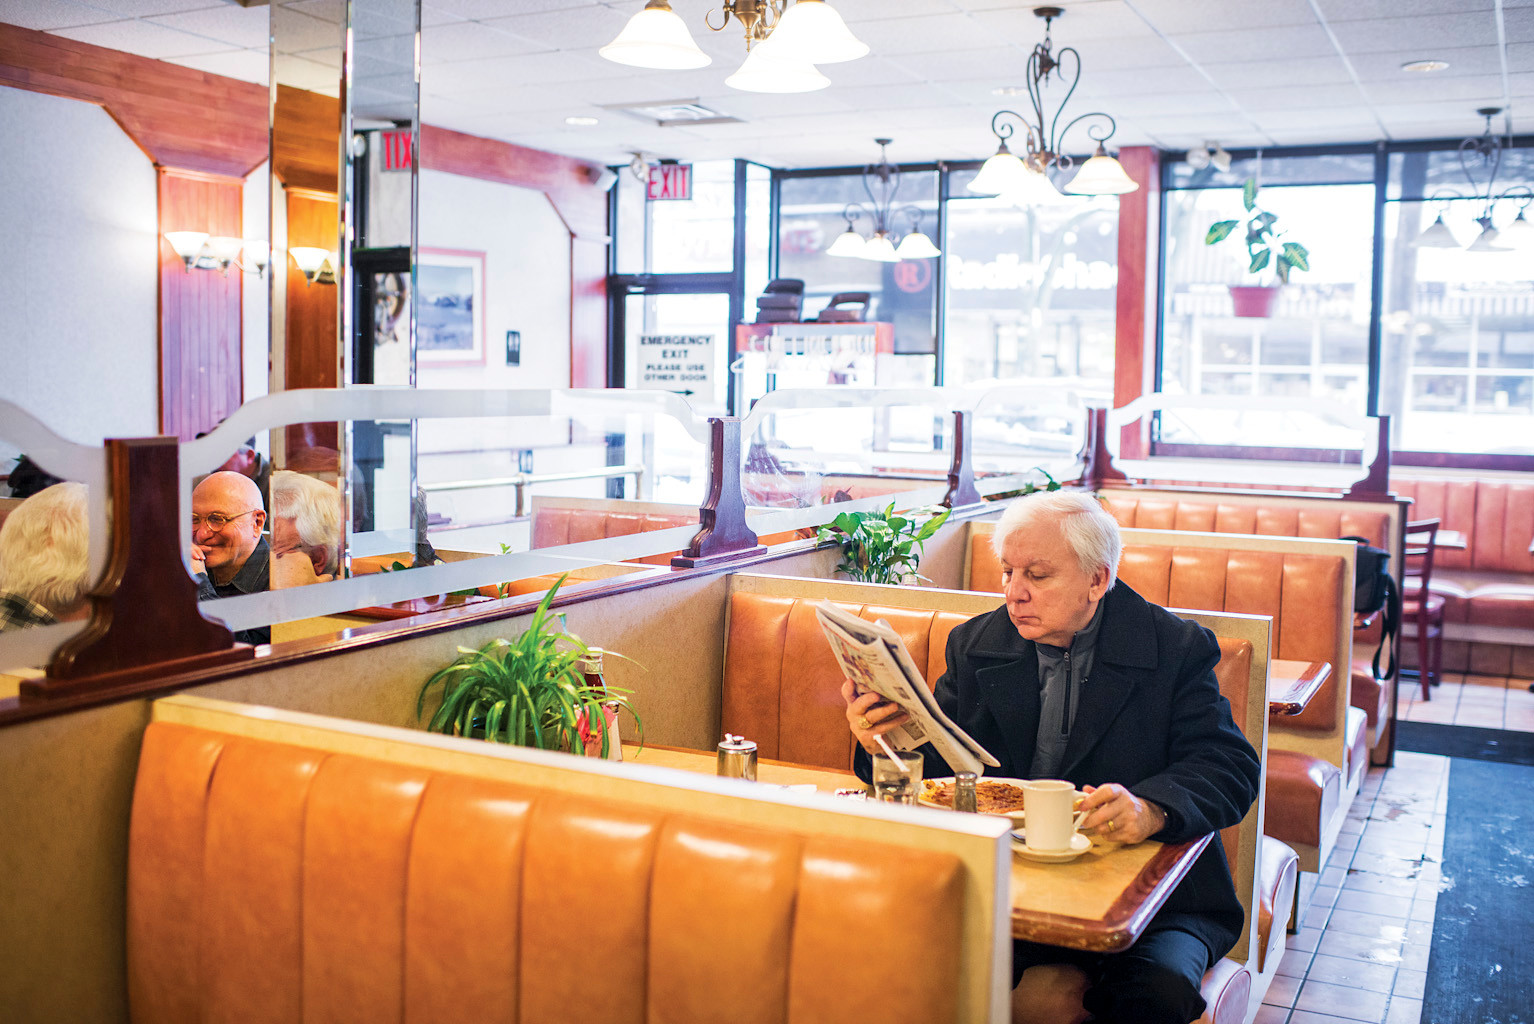 Ed Young, 68, reads the newspaper at the Blue Bay Restaurant in Riverdale.